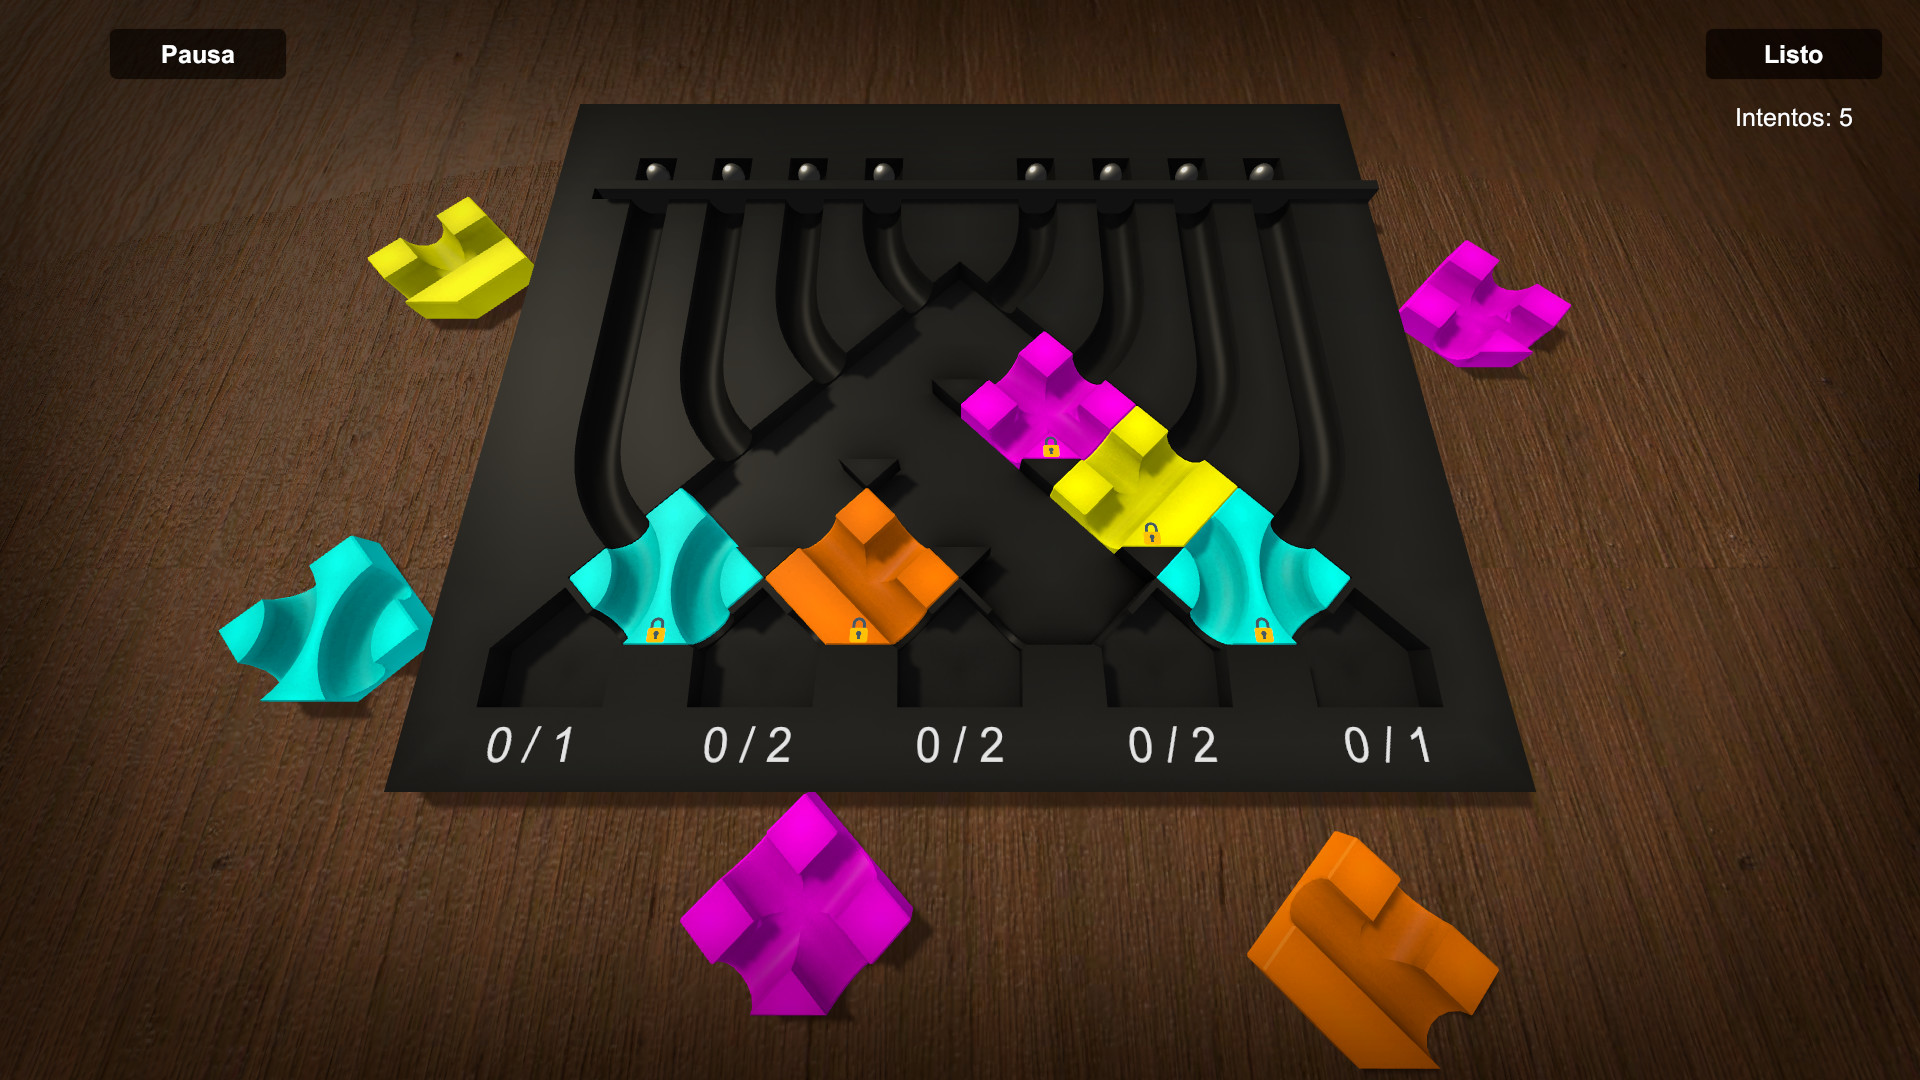 Logic Circuit: Marble Puzzle Free Download